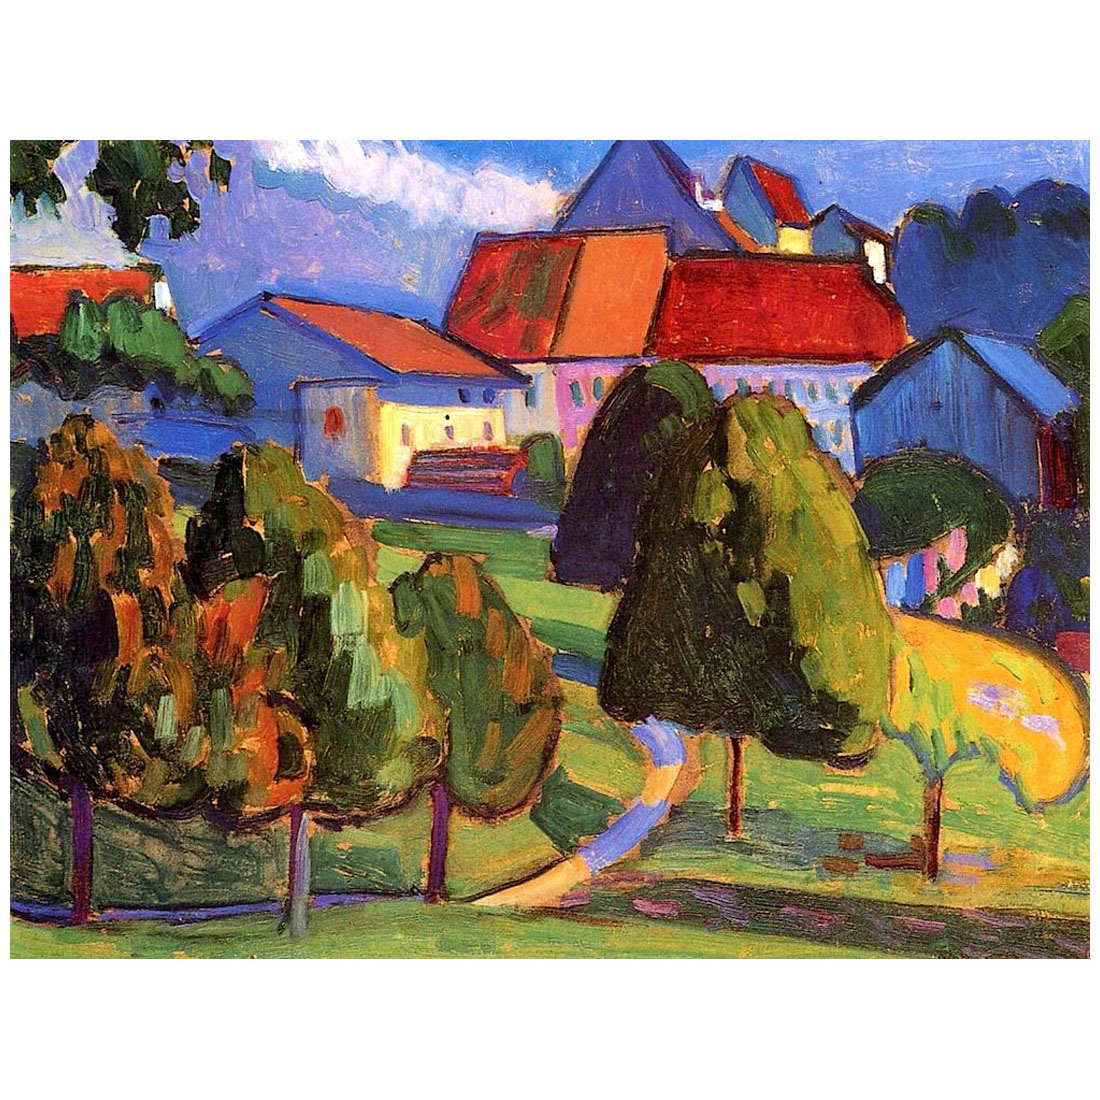 Gabriele Munter. Outskirts of Murnau. 1908. Private Collection